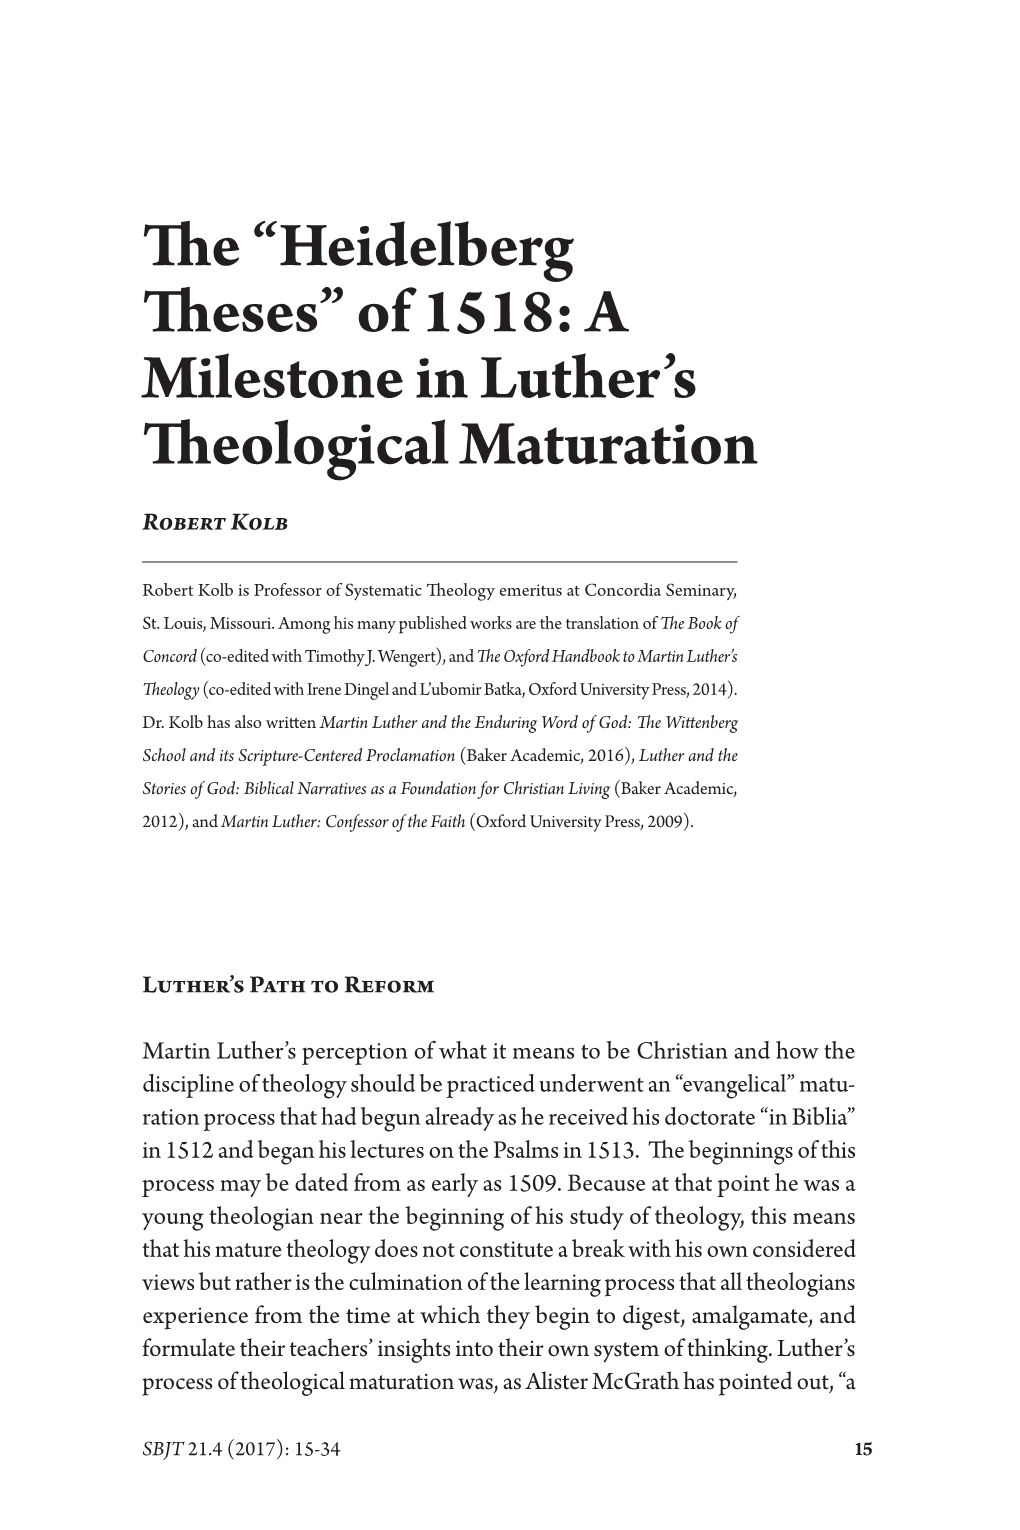 Heidelberg Theses” of 1518: a Milestone in Luther’S Theological Maturation Robert Kolb